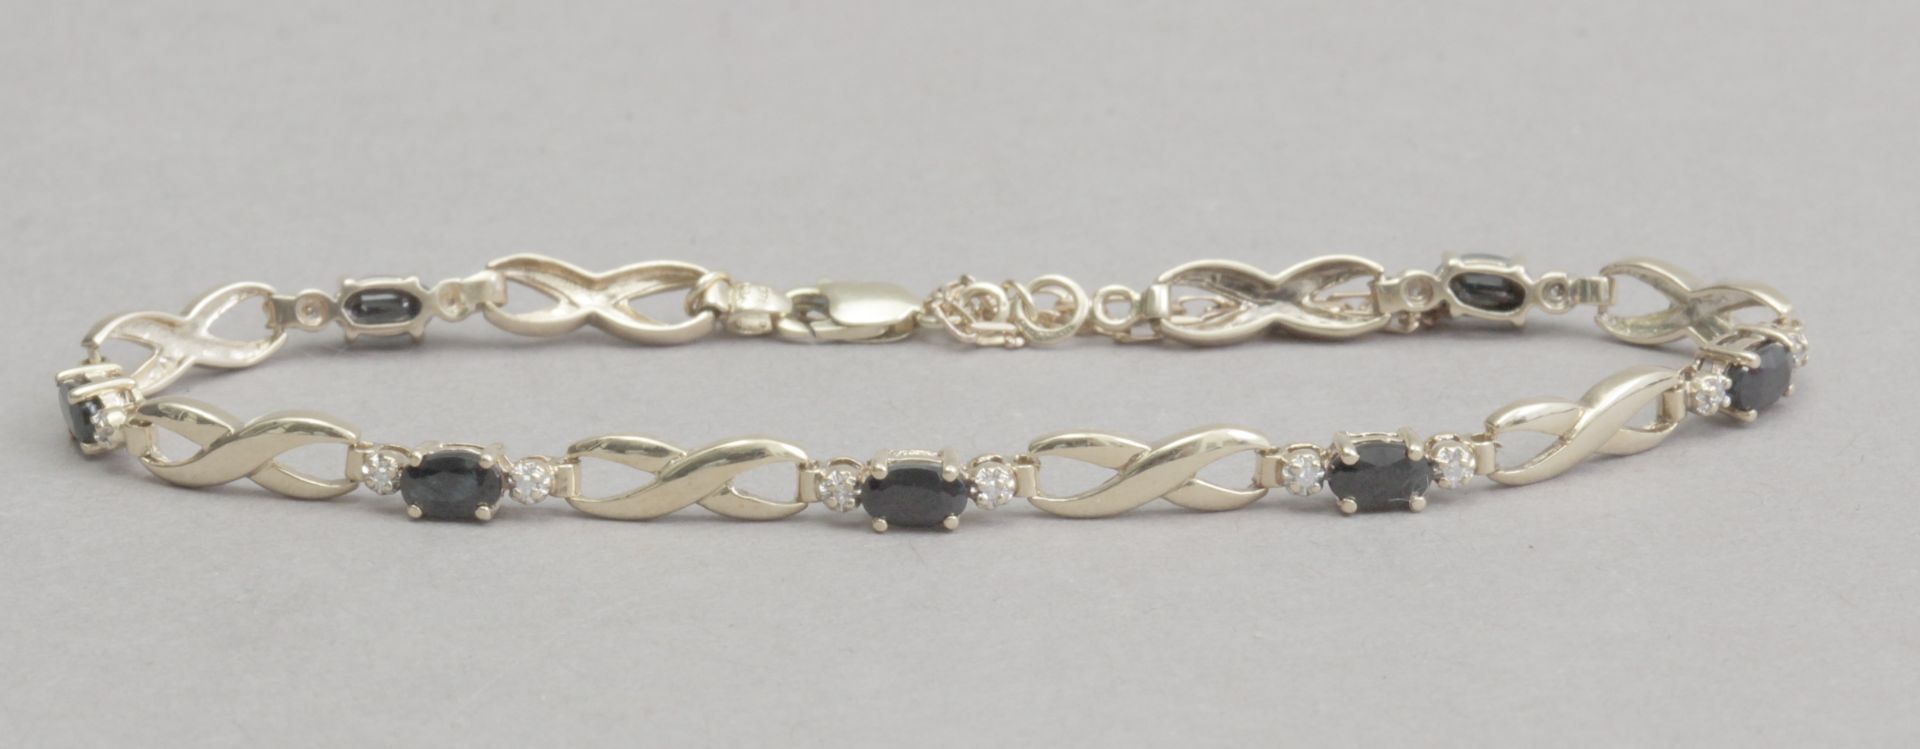 A sapphire and diamond bracet with a 14k. yellow gold setting